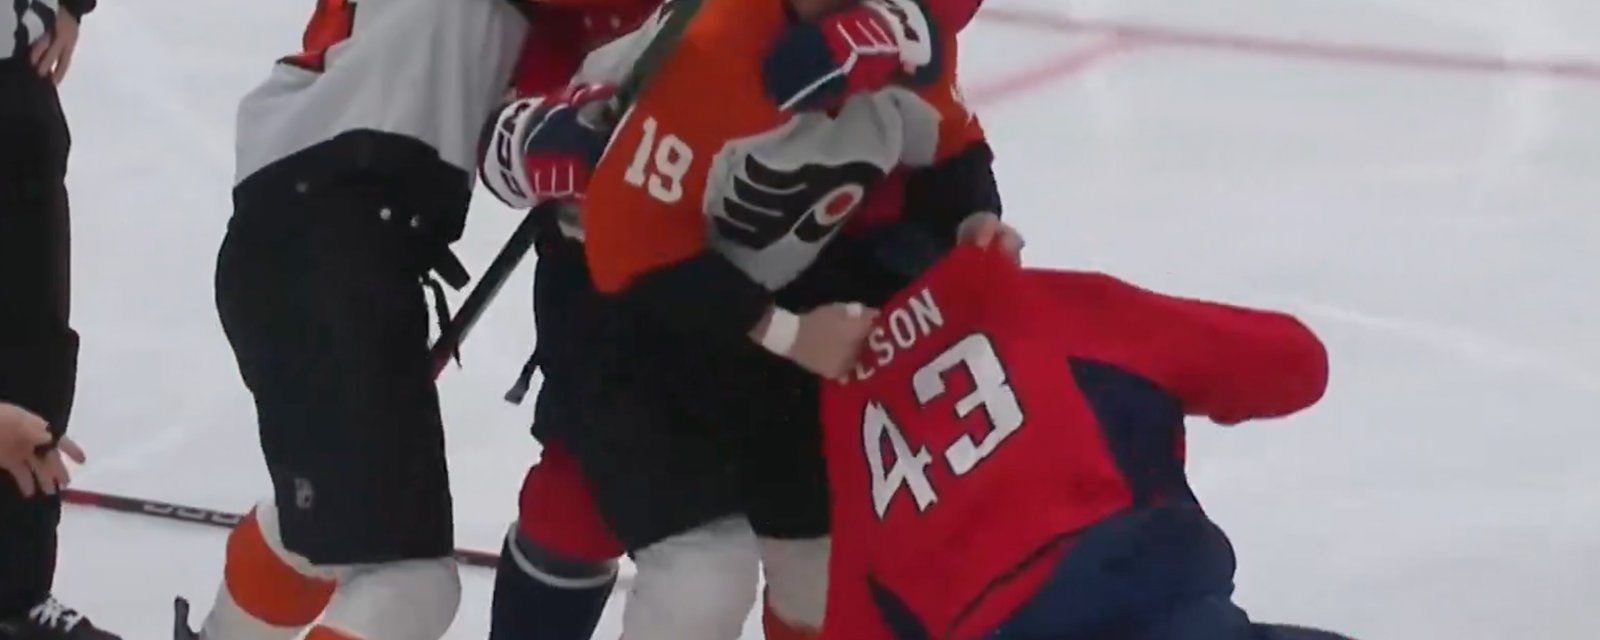 Former teammates Tom Wilson and Garnet Hathaway come to blows during game stoppage!